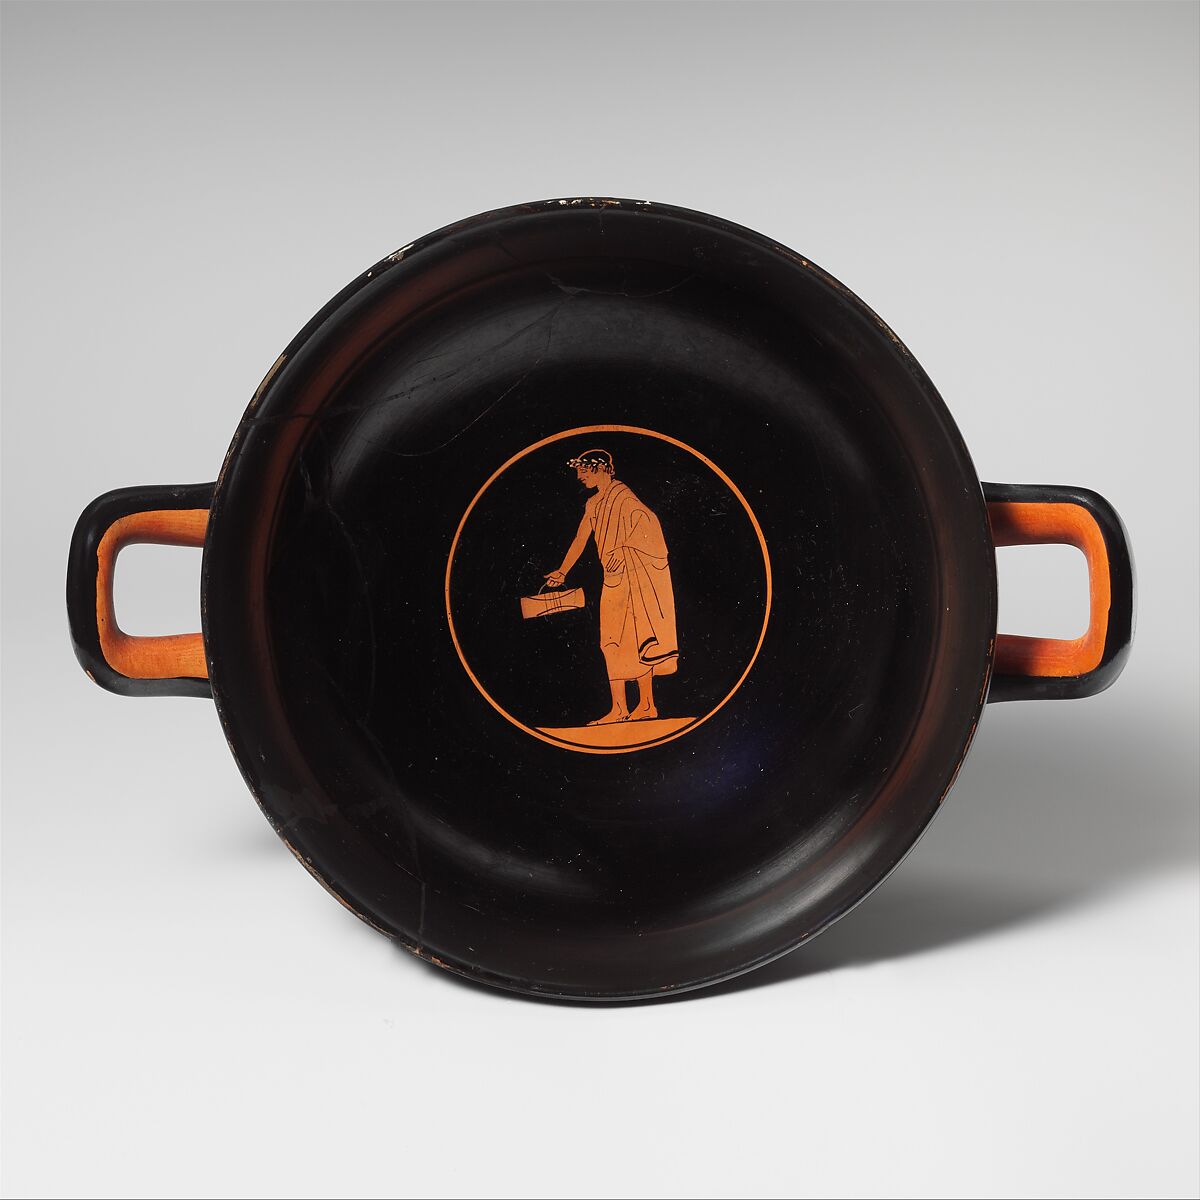 Terracotta kylix (drinking cup), Attributed to the Painter of Munich 2660, Terracotta, Greek, Attic 